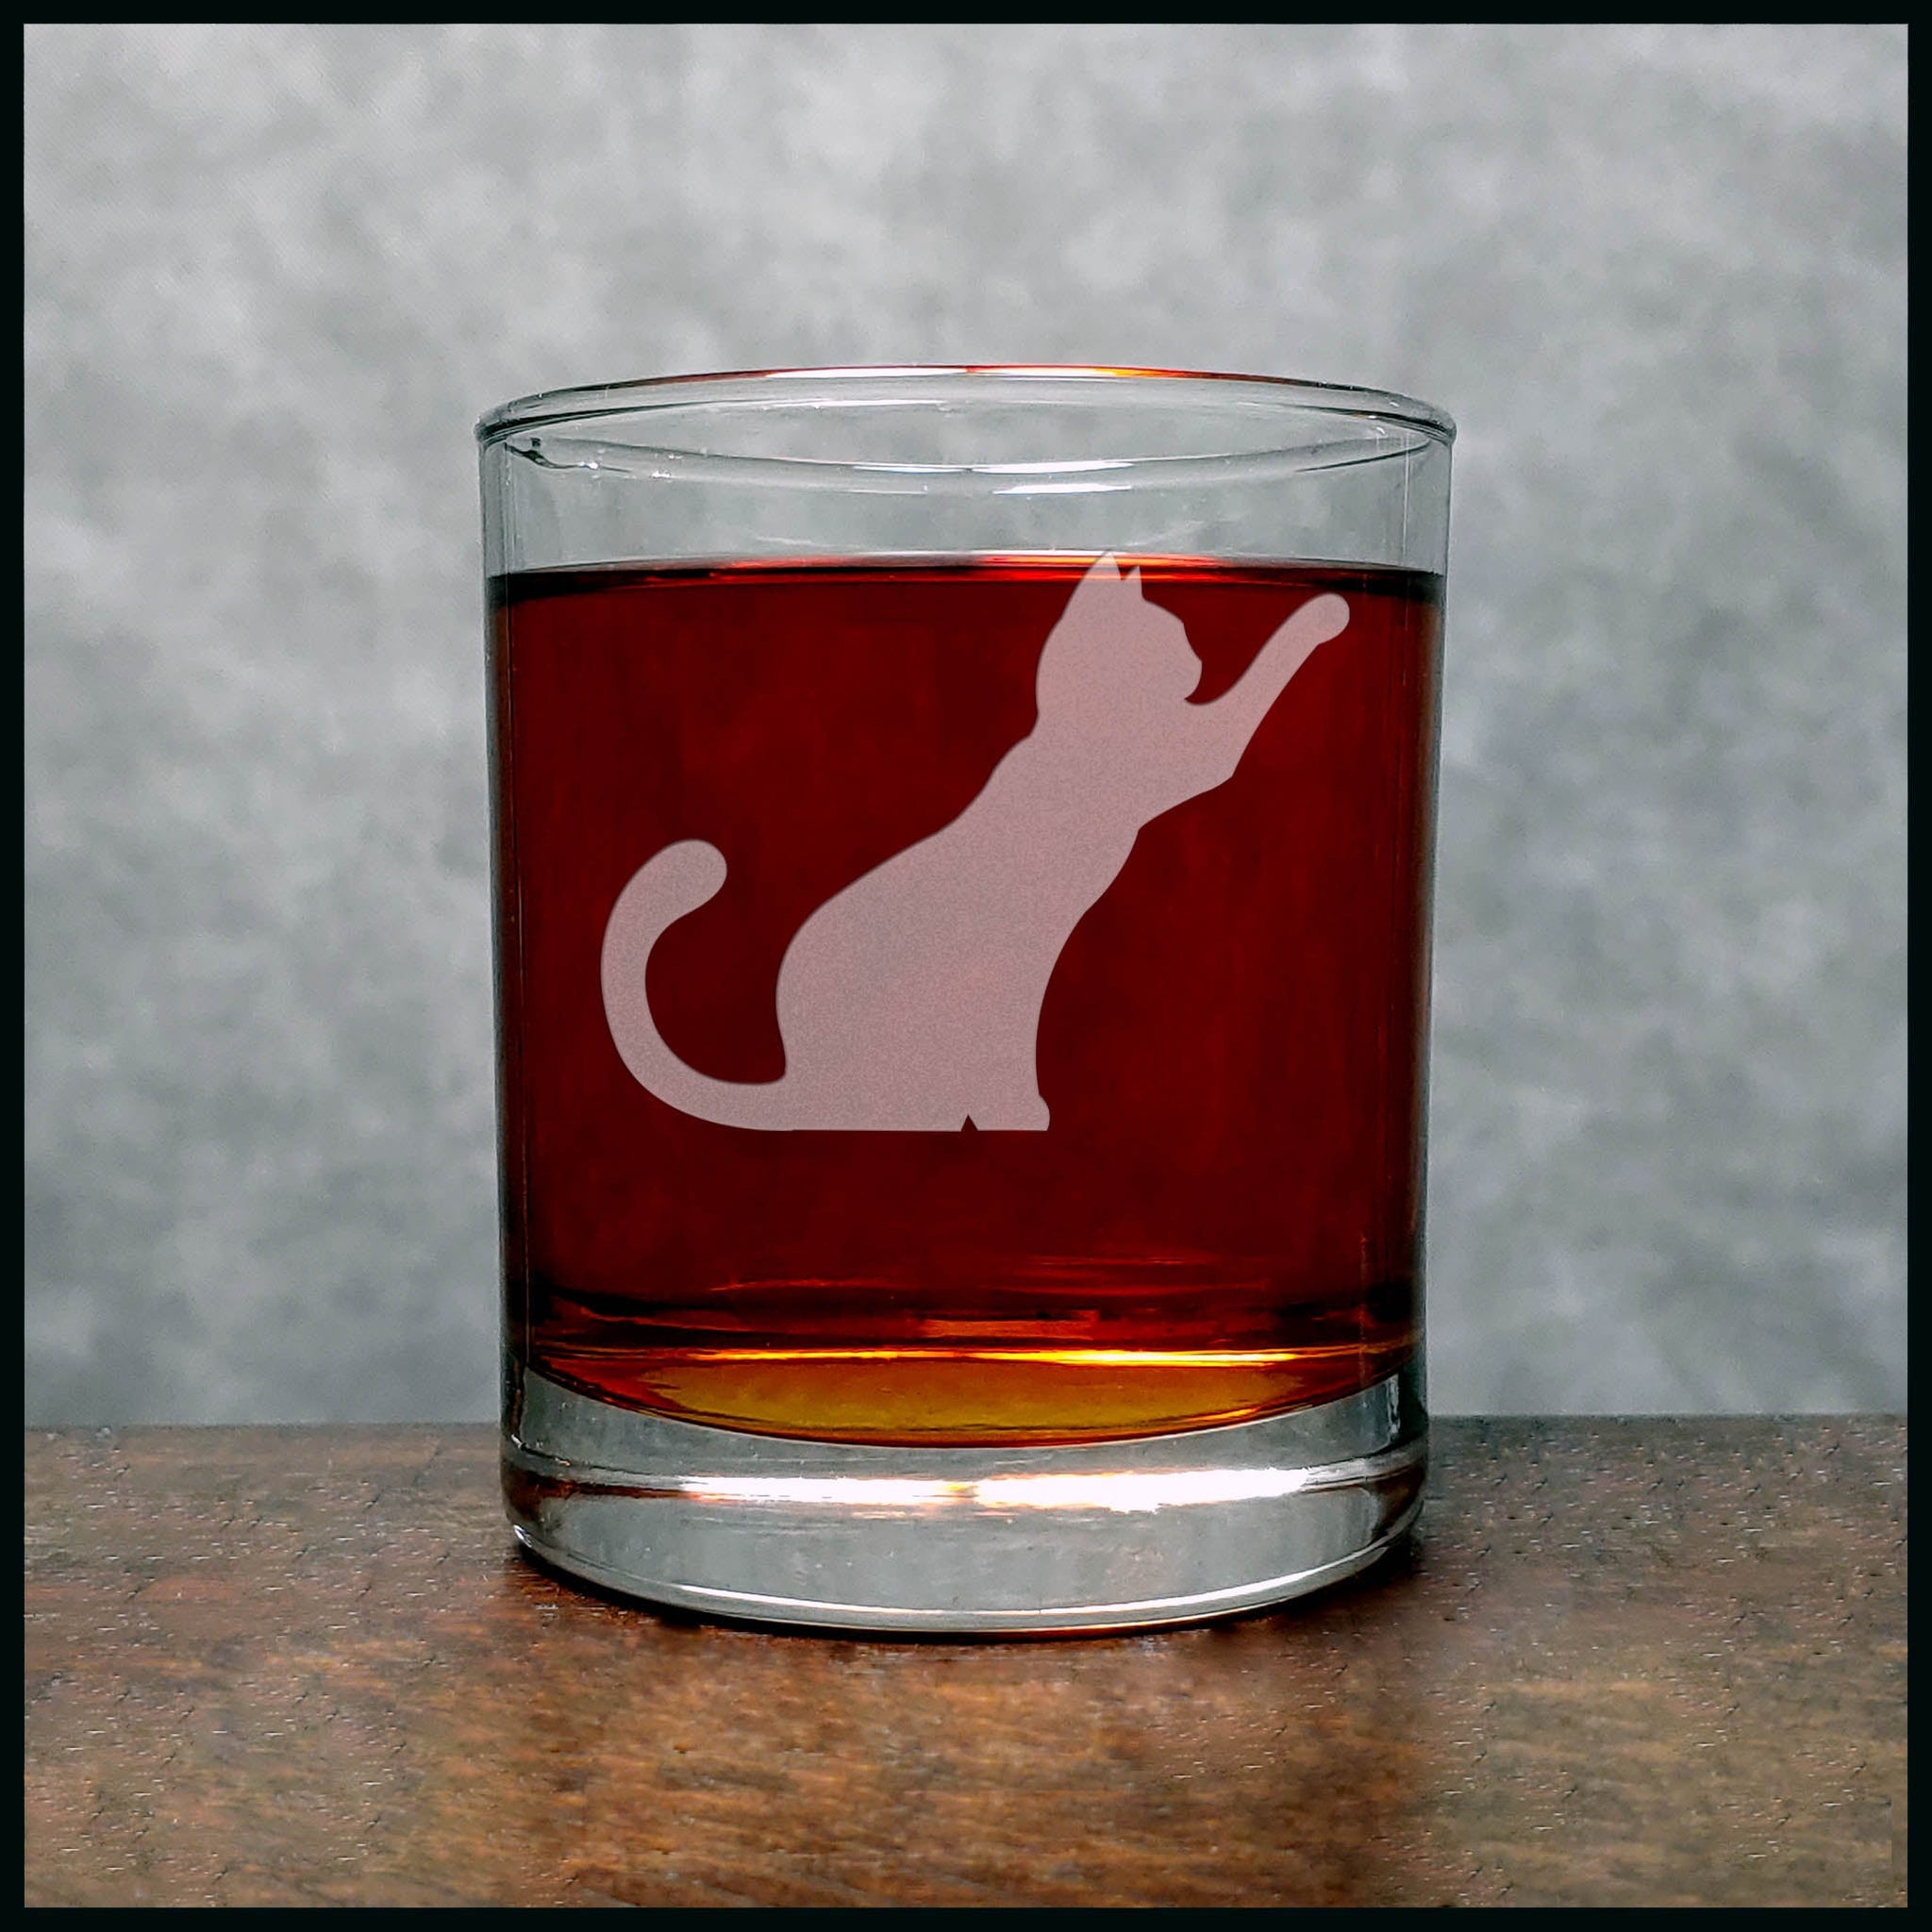 Playing Cat Whisky Glass - Copyright Hues in Glass